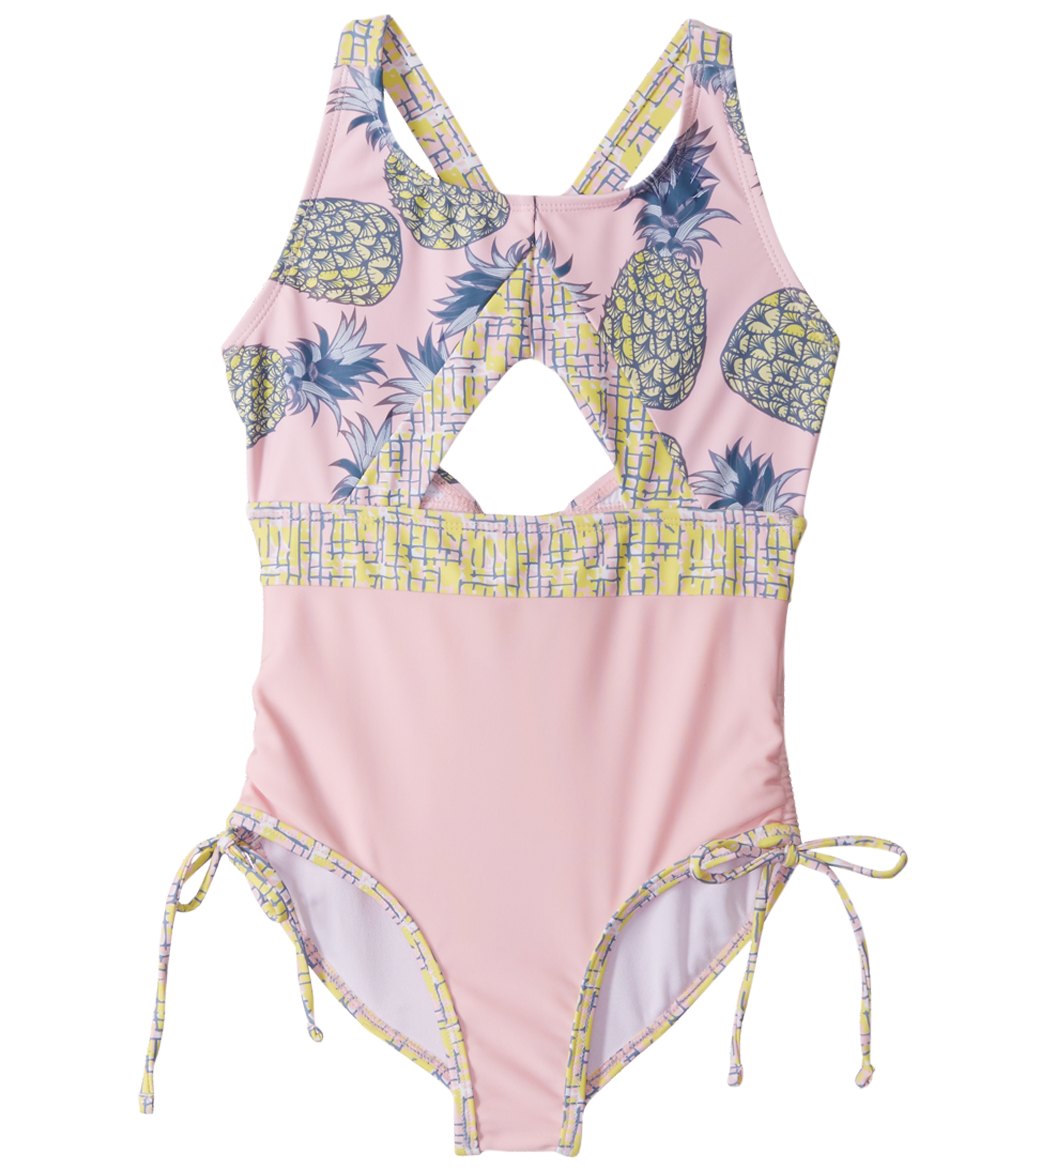 Limeapple Girls' Sweet Sunsations Printed Cut Out One Piece Swimsuit - Pink 16 Polyester/Elastane - Swimoutlet.com